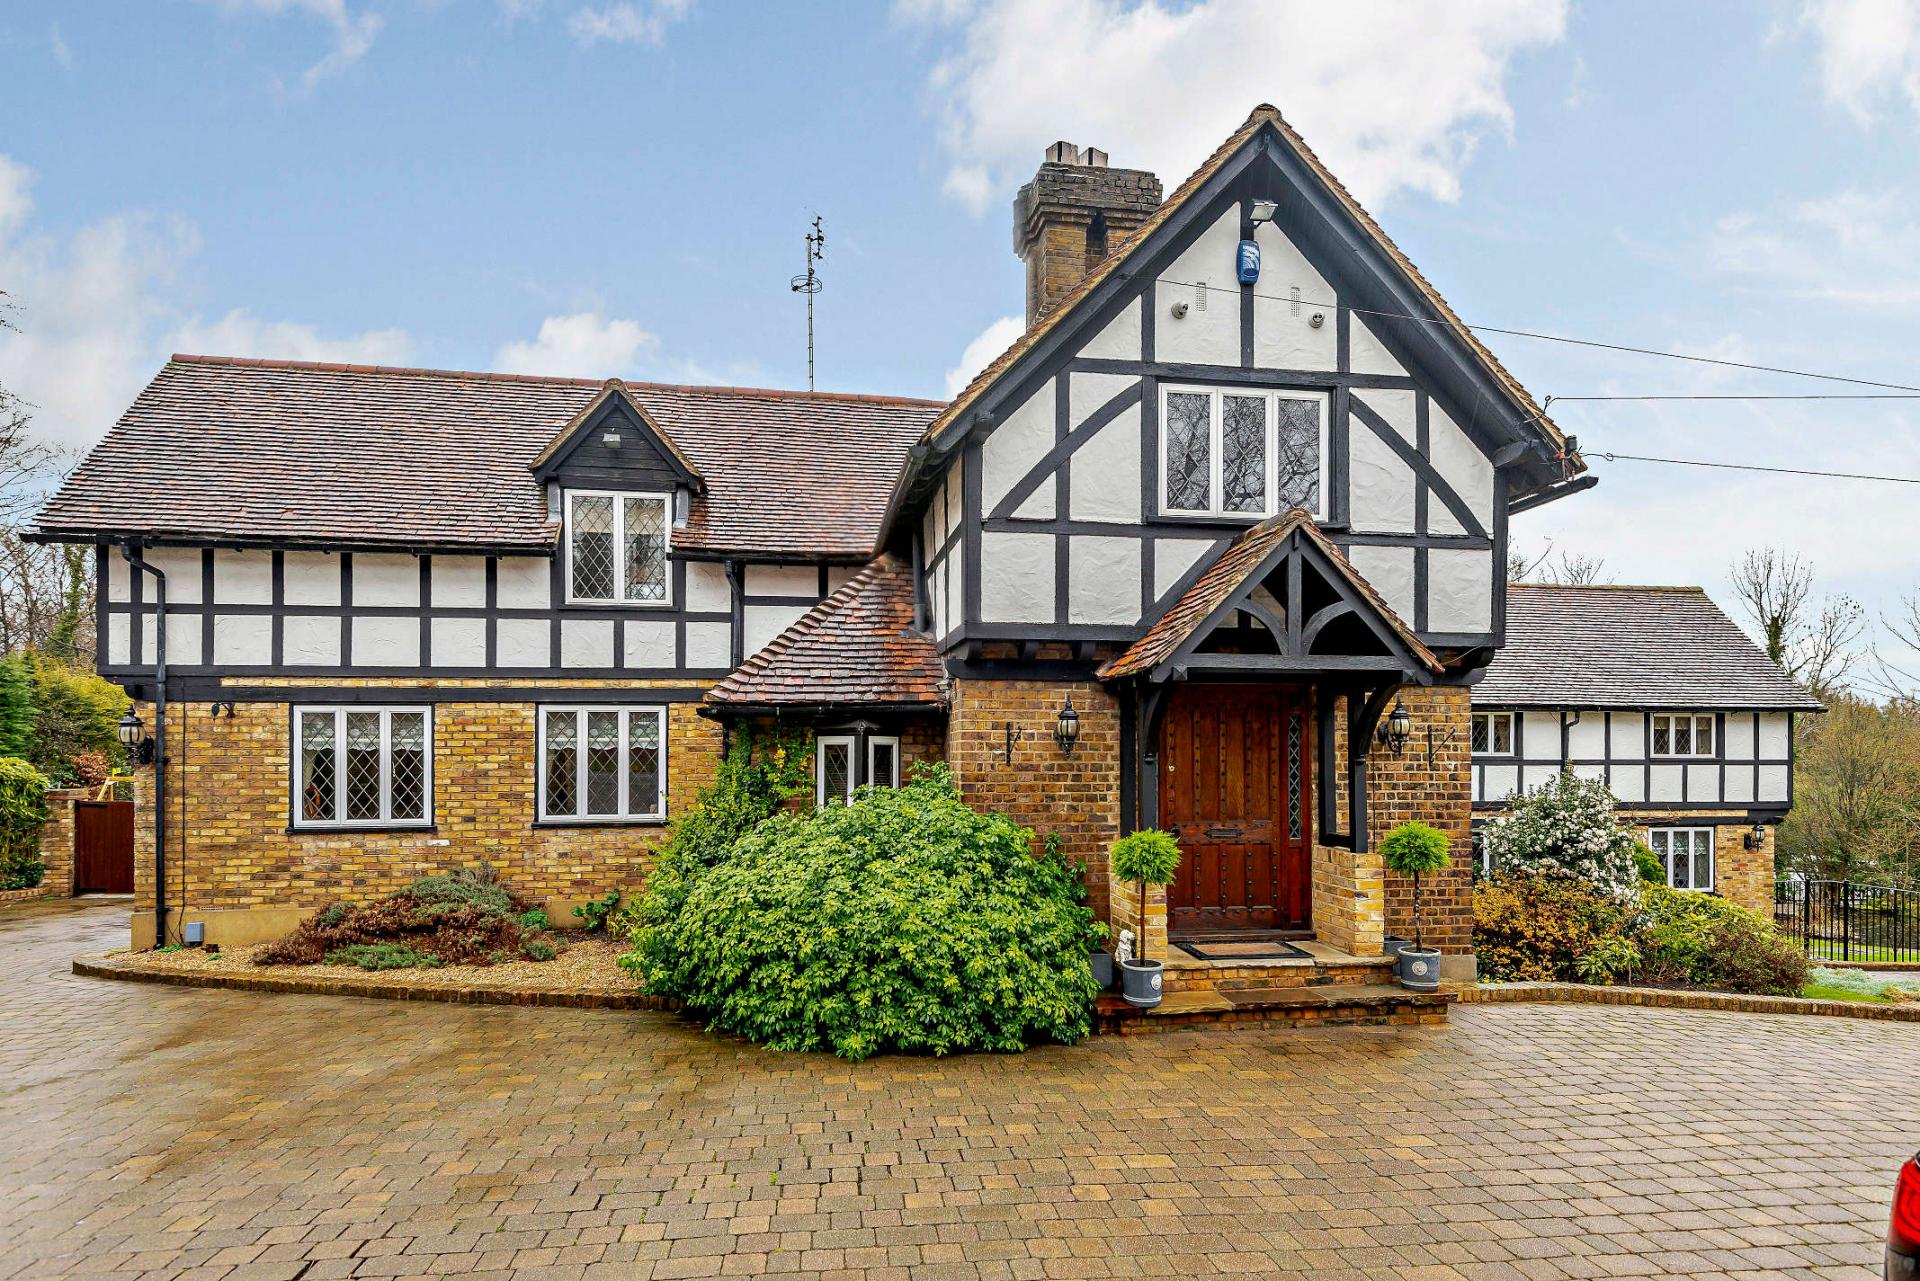 5 Bedroom Detached House For Sale in The Ridgeway, Cuffley